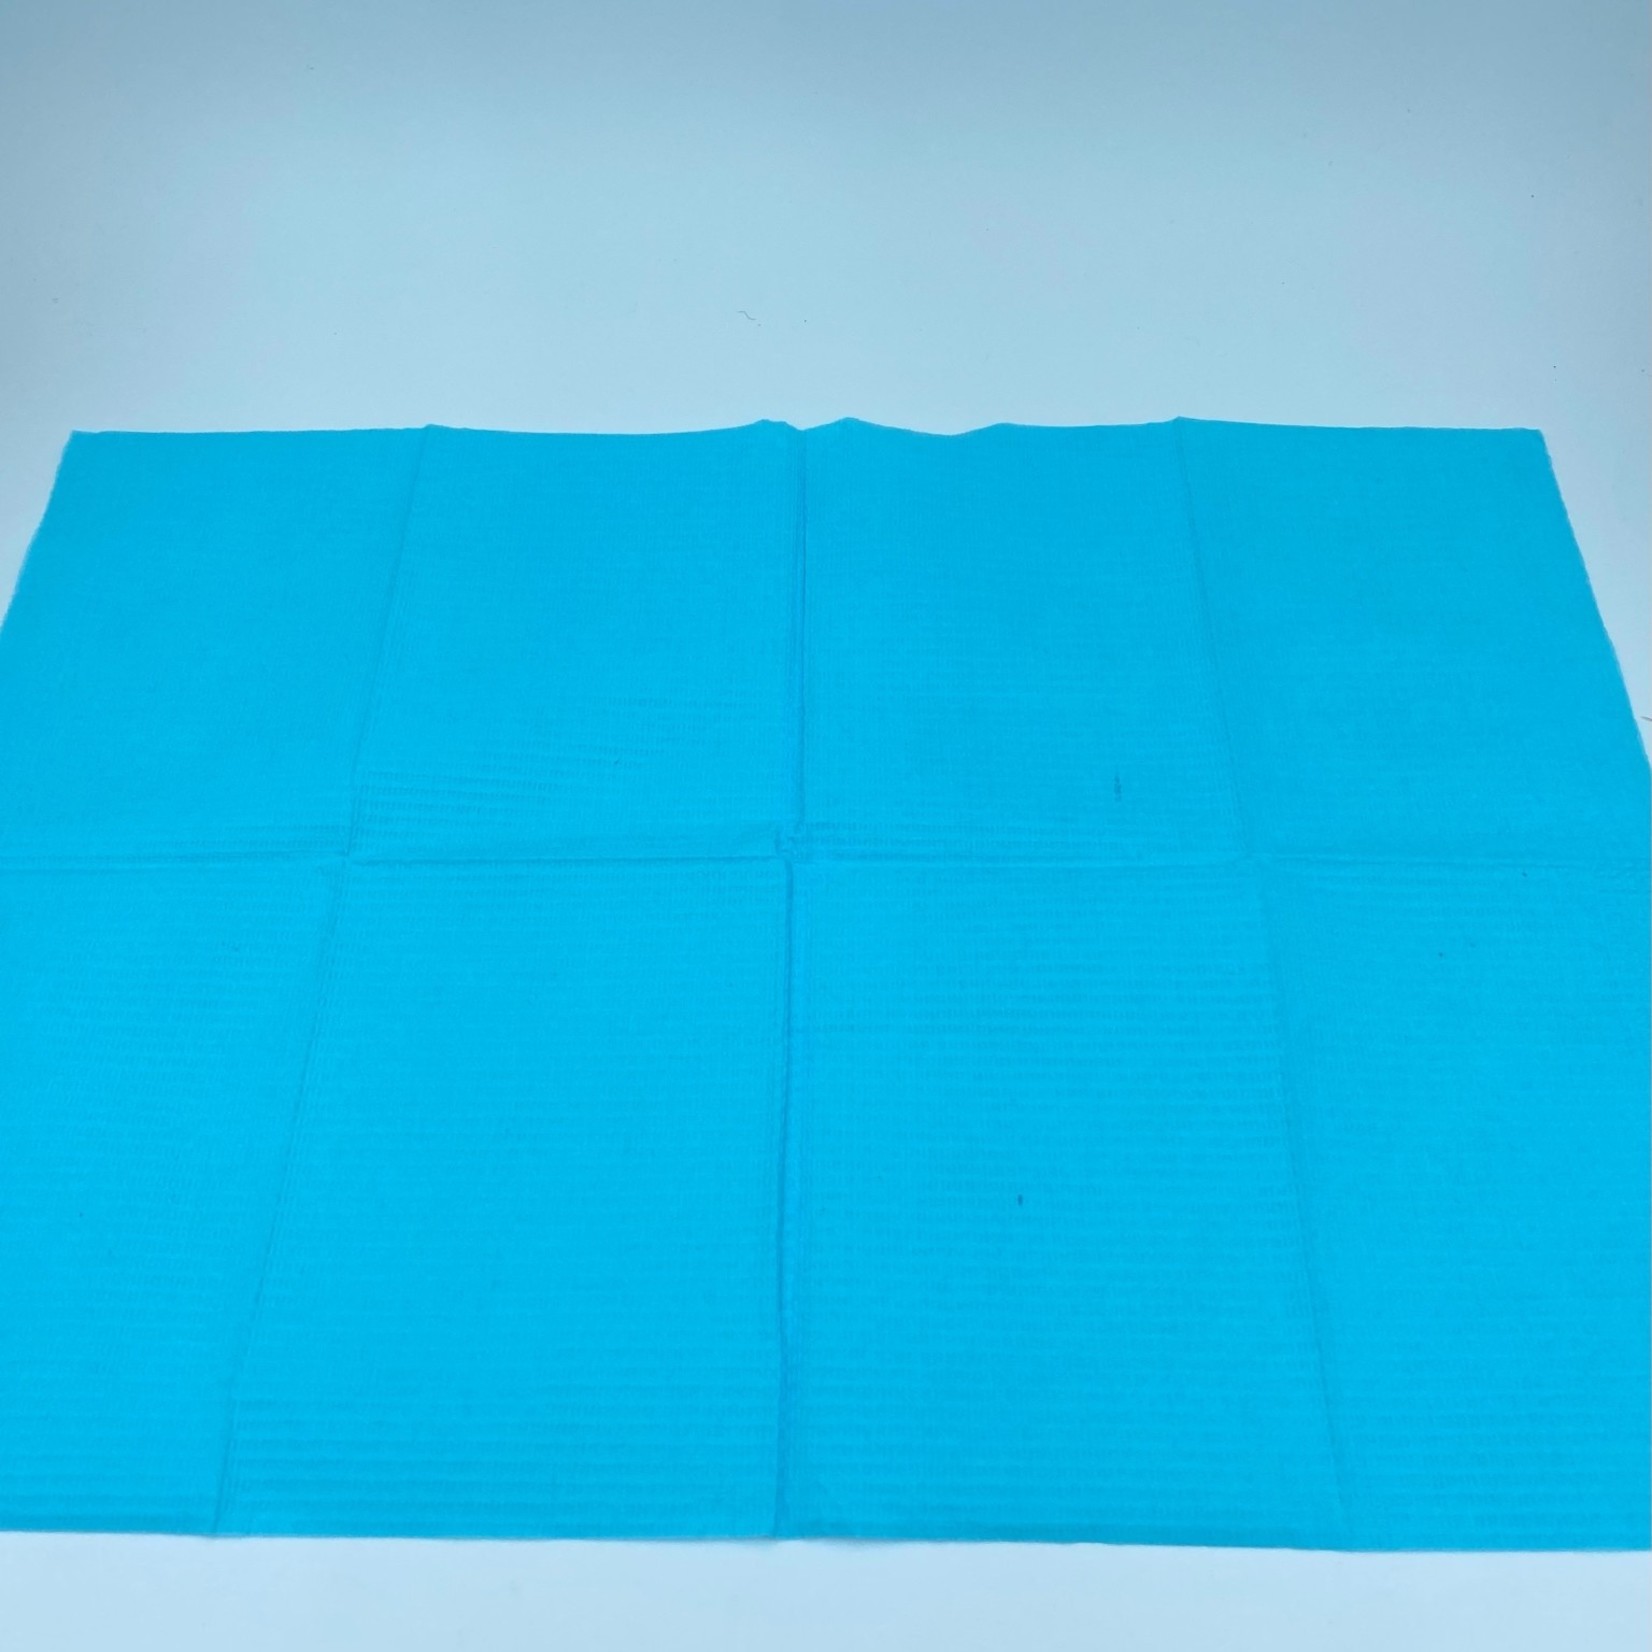 The Studio Disposable Towels - Table Liners/ Bibs - Blue - 50 ct